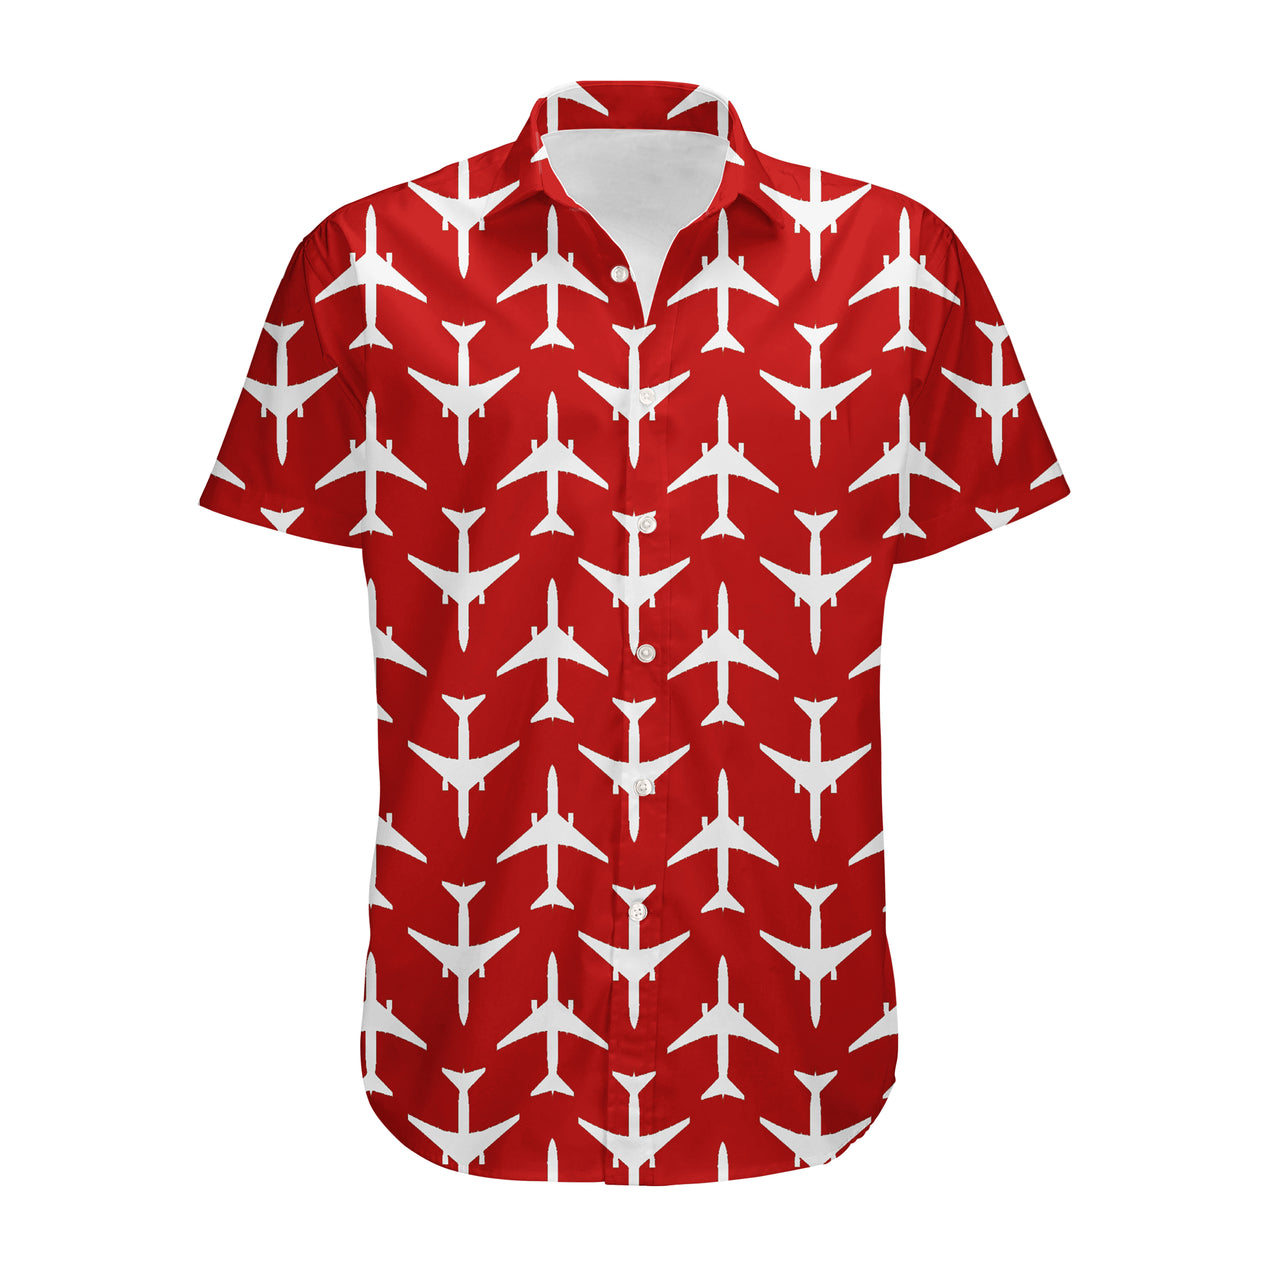 Perfectly Sized Seamless Airplanes Red Designed 3D Shirts